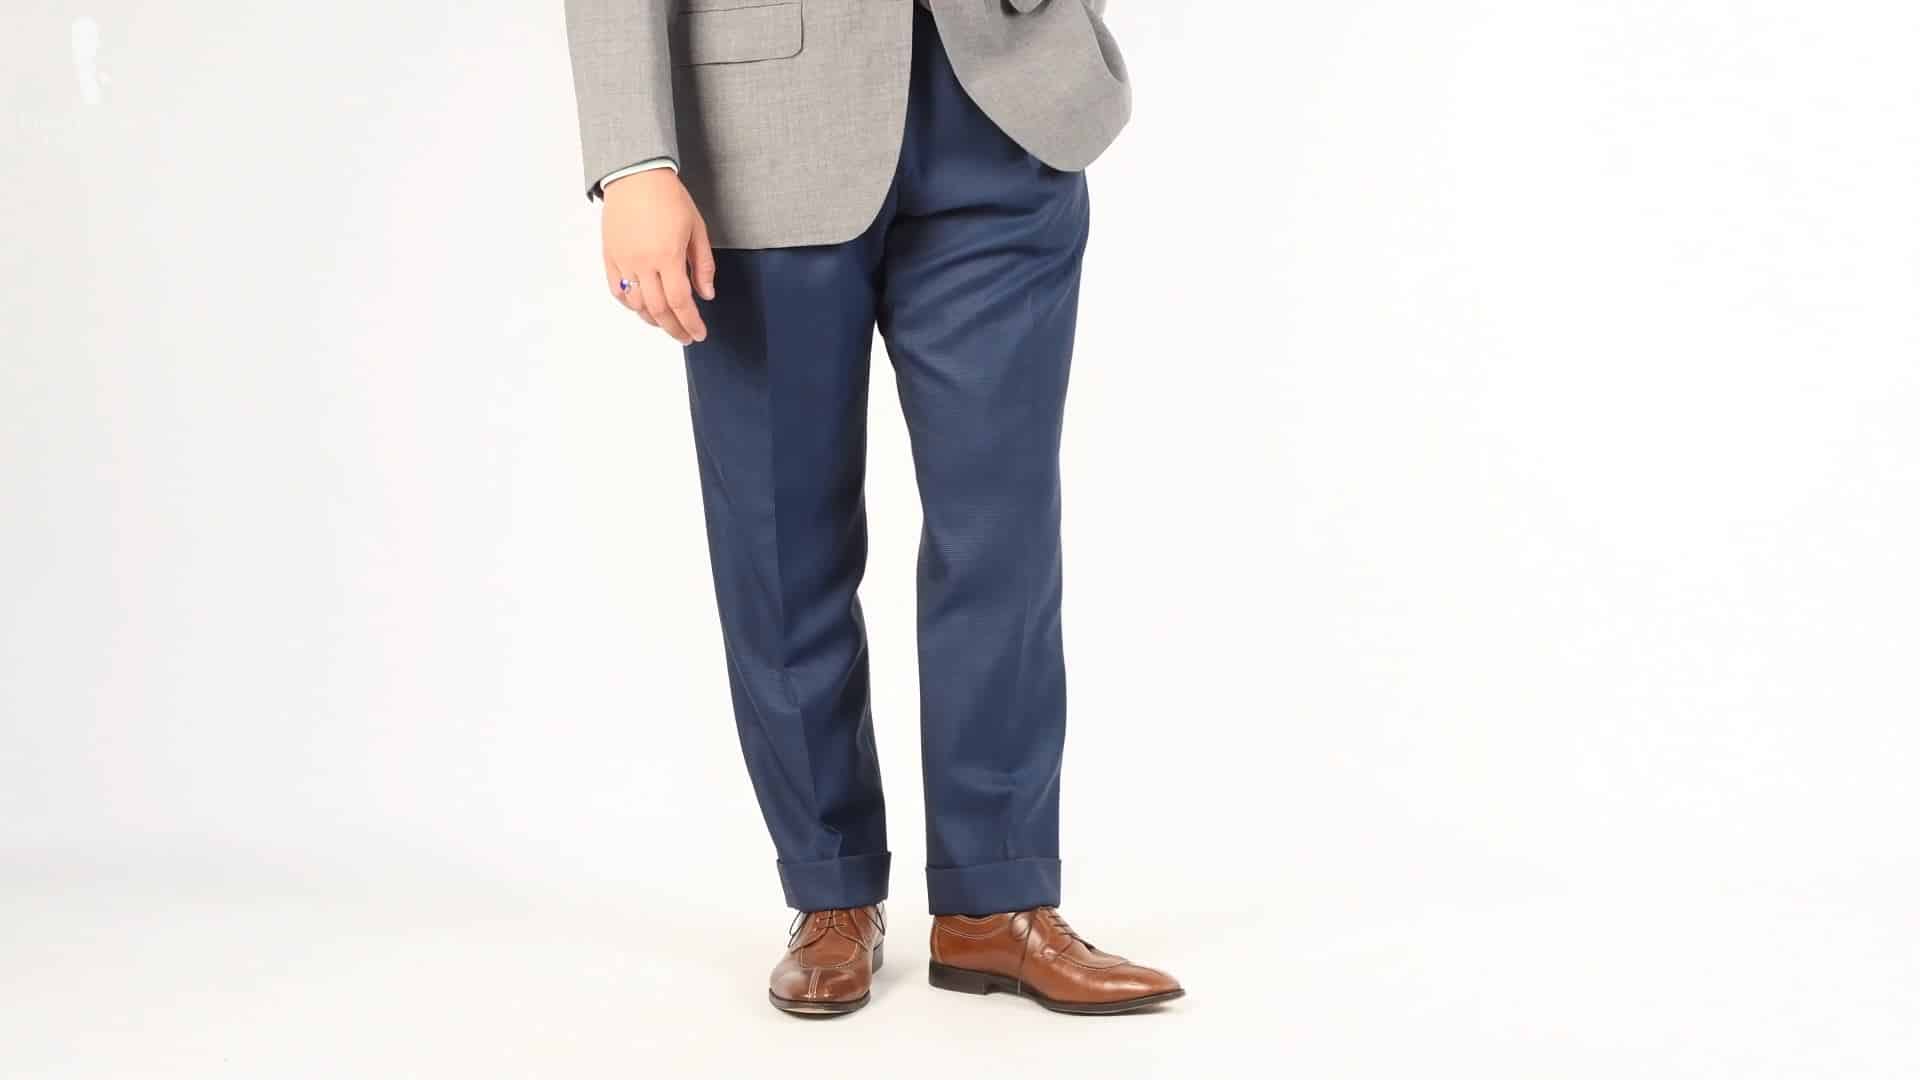 Blue pants paired with gray jacket and brown shoes